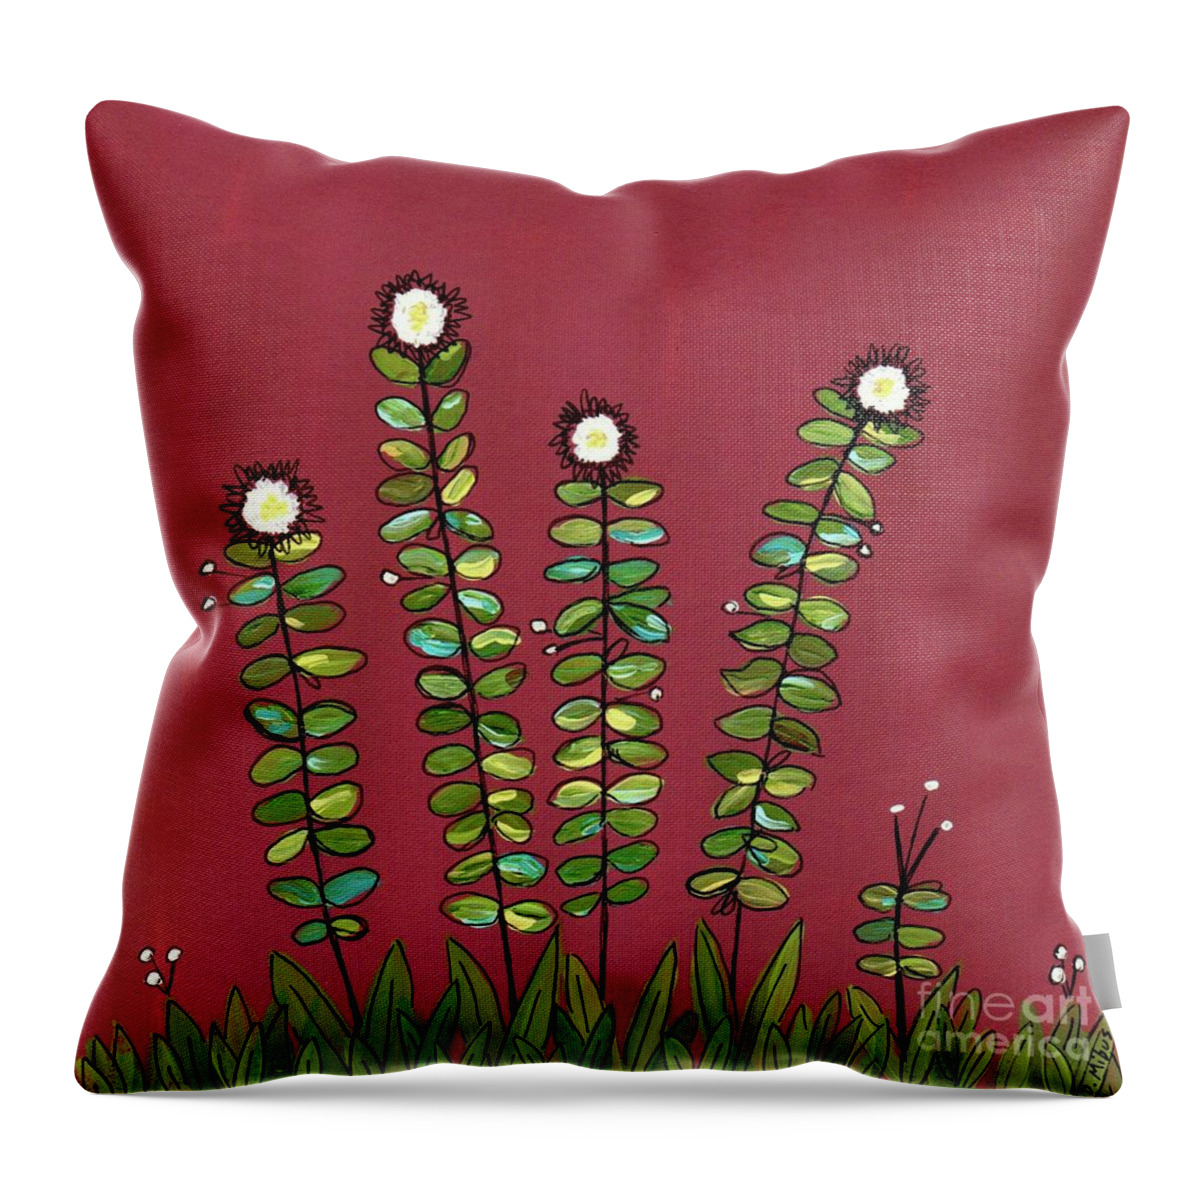 Retro Flowers Throw Pillow featuring the painting Retro Flower Garden by Donna Mibus